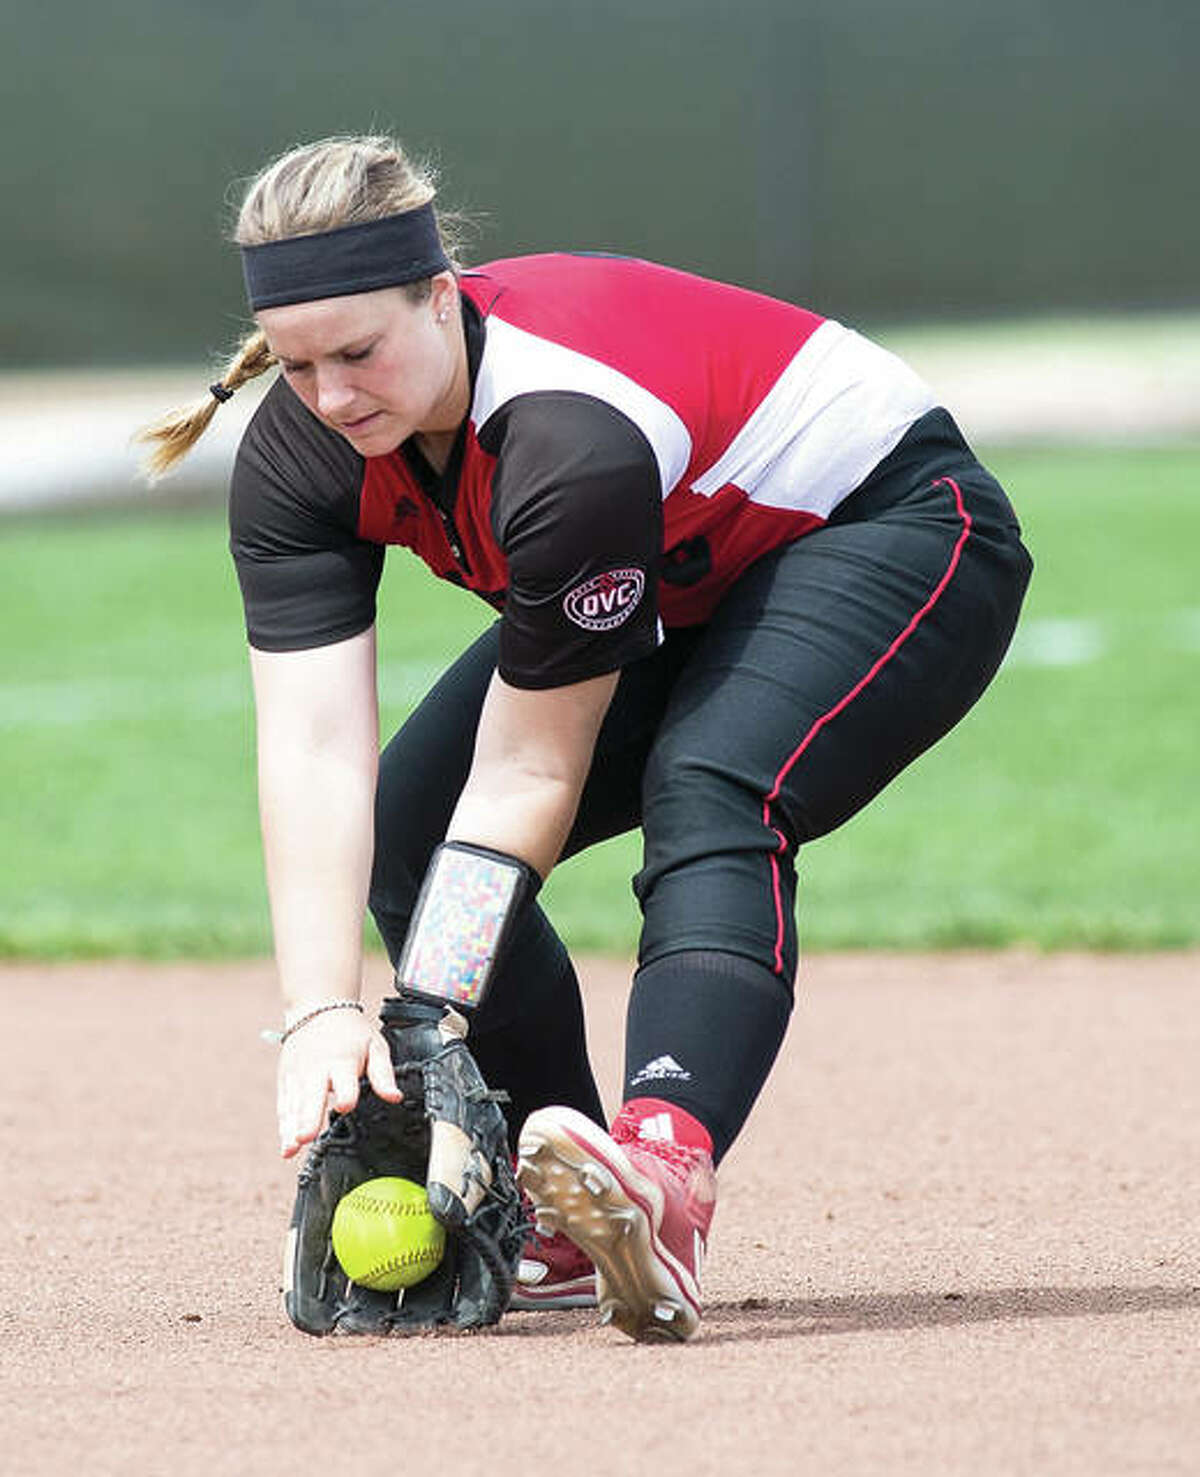 SIUE shortstop Sarah Lopesilvero fields a groundball during the Cougars’ doubleheader sweep of Southeast Missouri on Friday at Cougar Field in Edwardsville.